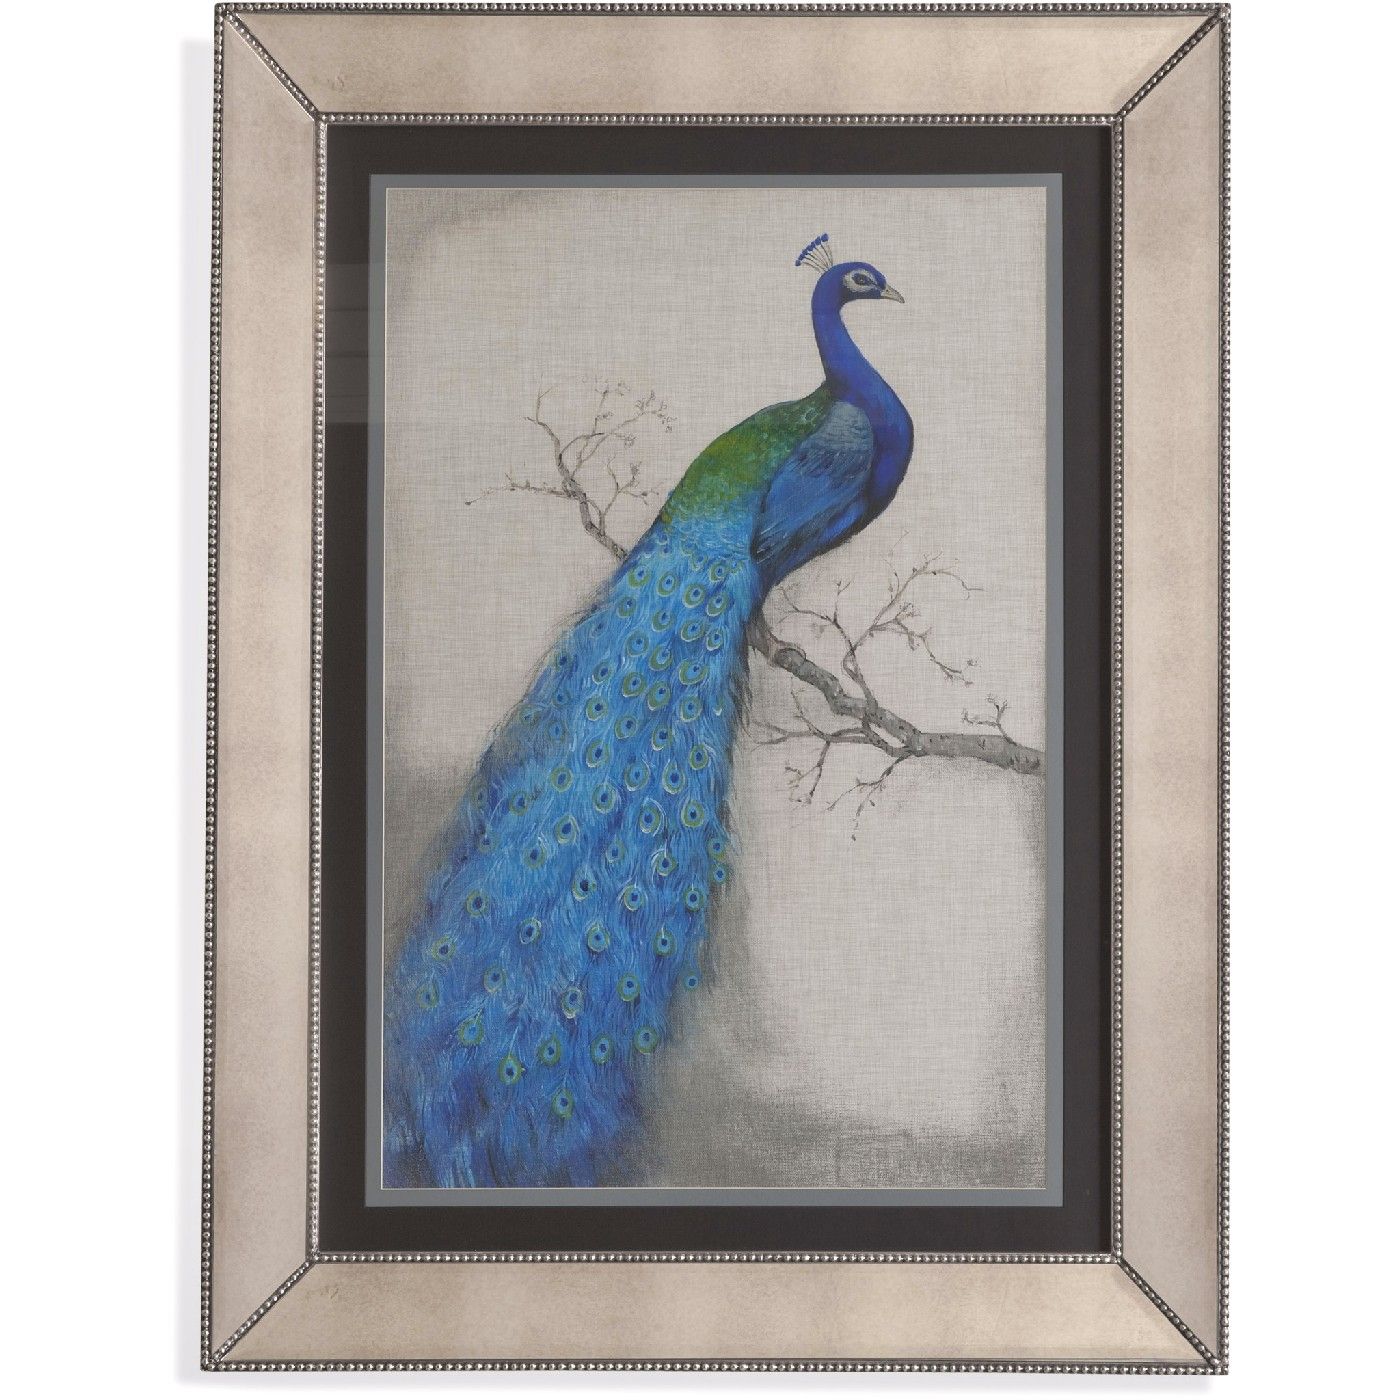 Peacock Blue I Traditional Framed Art 9900 177aec Throughout Most Up To Date Wall Framed Art Prints (View 17 of 20)